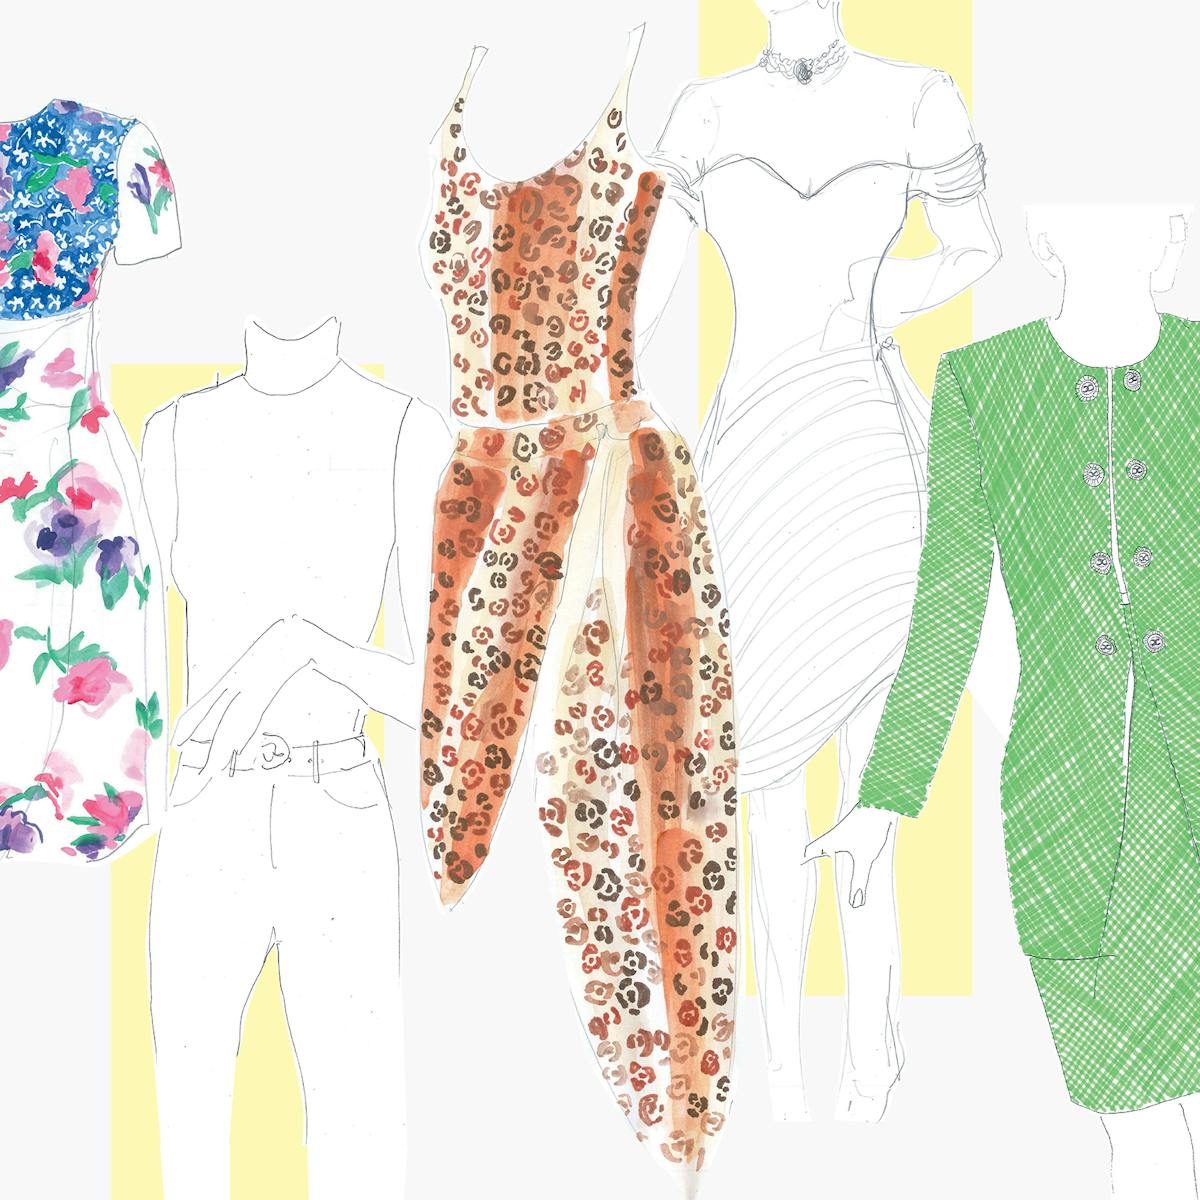 Sketches of some of the pieces of Diana’s iconic wardrobe in The Crown. From left to right: a flower-print dress, a cheetah print swimsuit and sarong, and a green suit set.